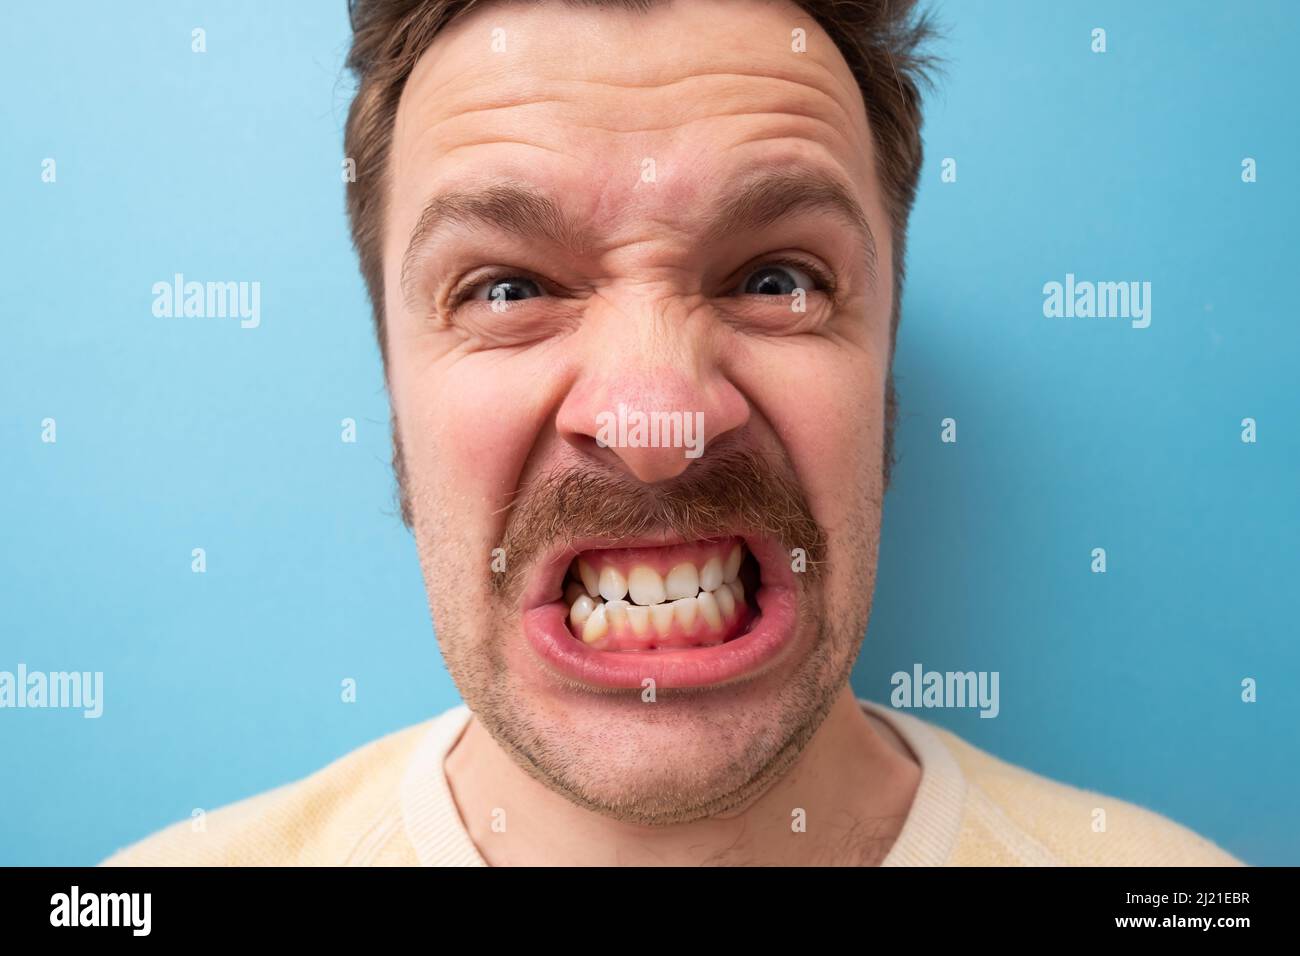 Caucasian man with mustache shouting being angry and furious. Stock Photo